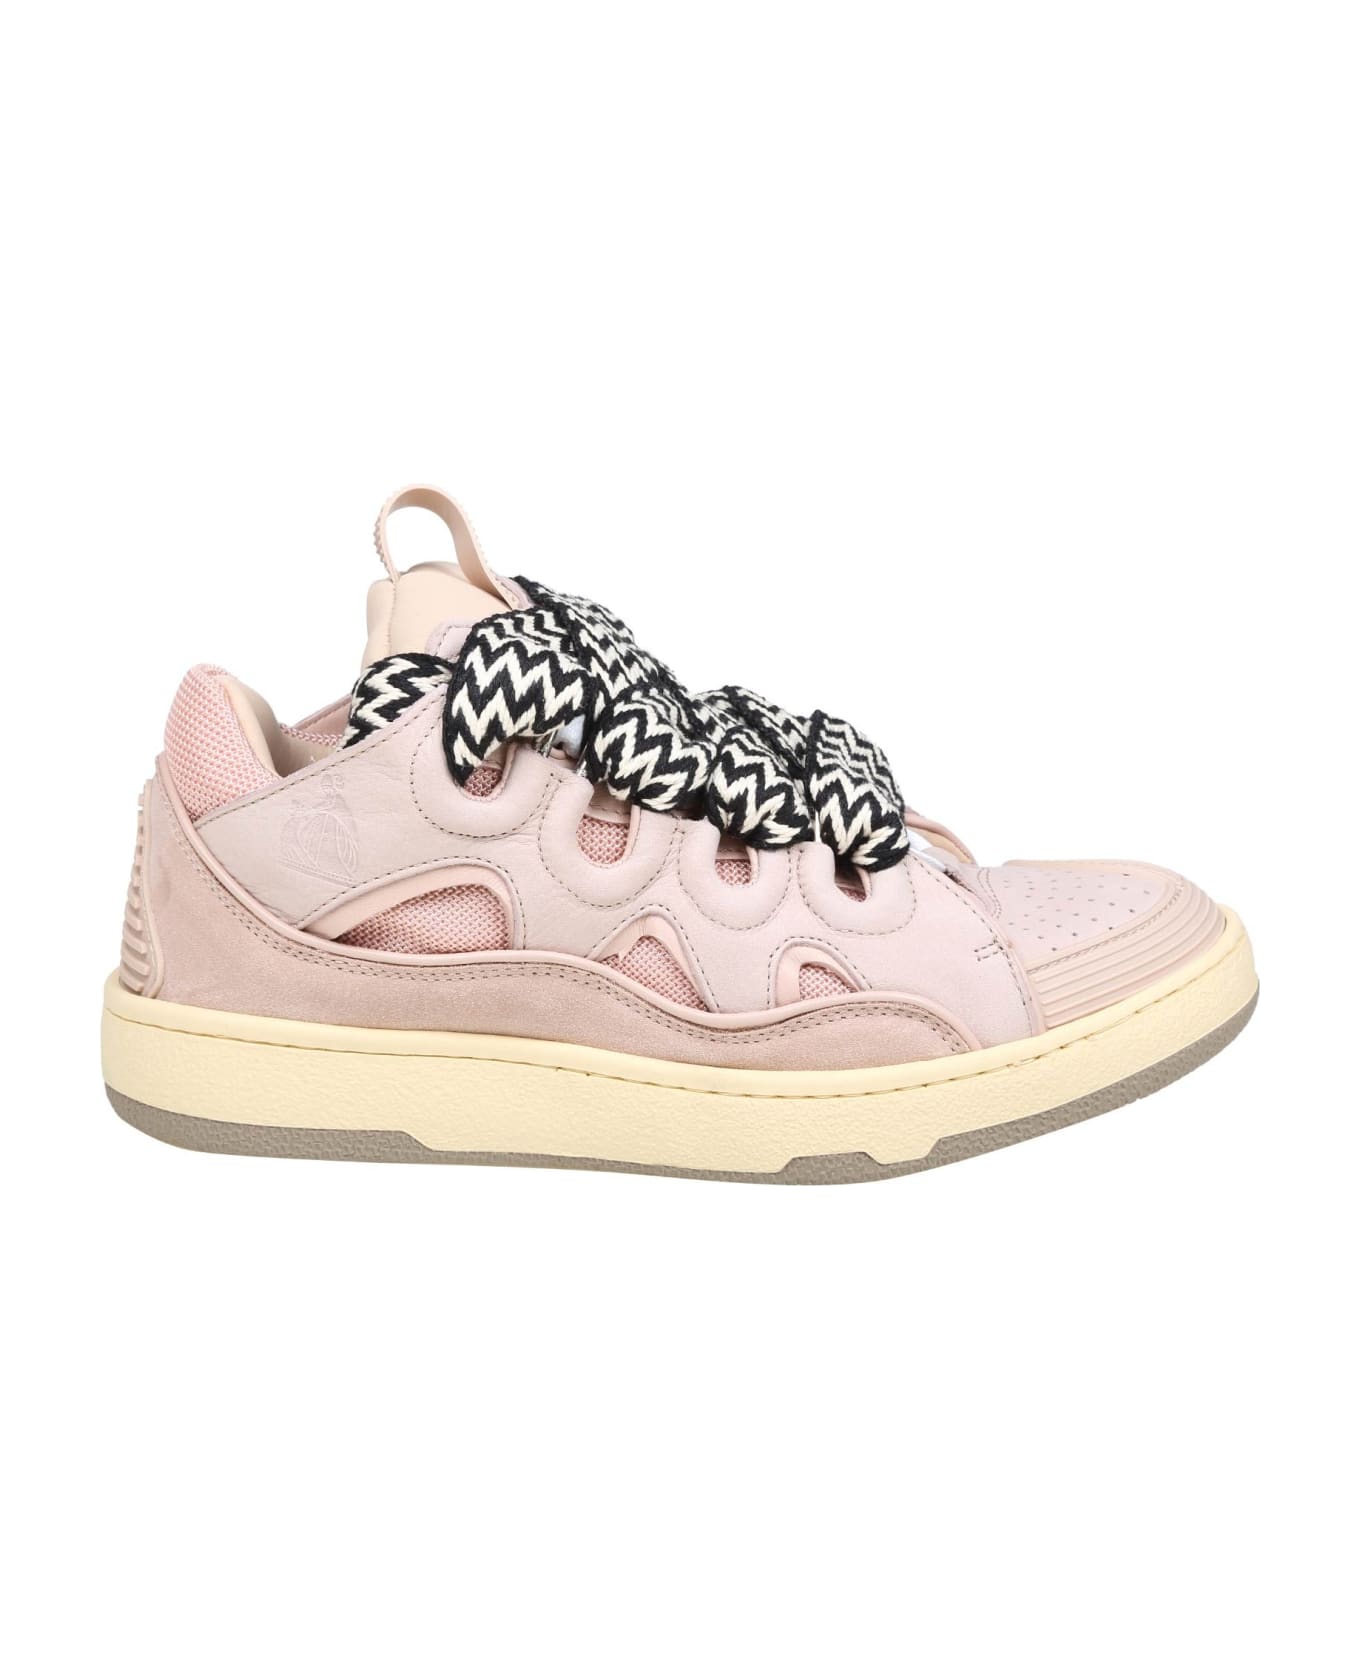 Lanvin Skate Sneakers In Pink Leather - Pink スニーカー